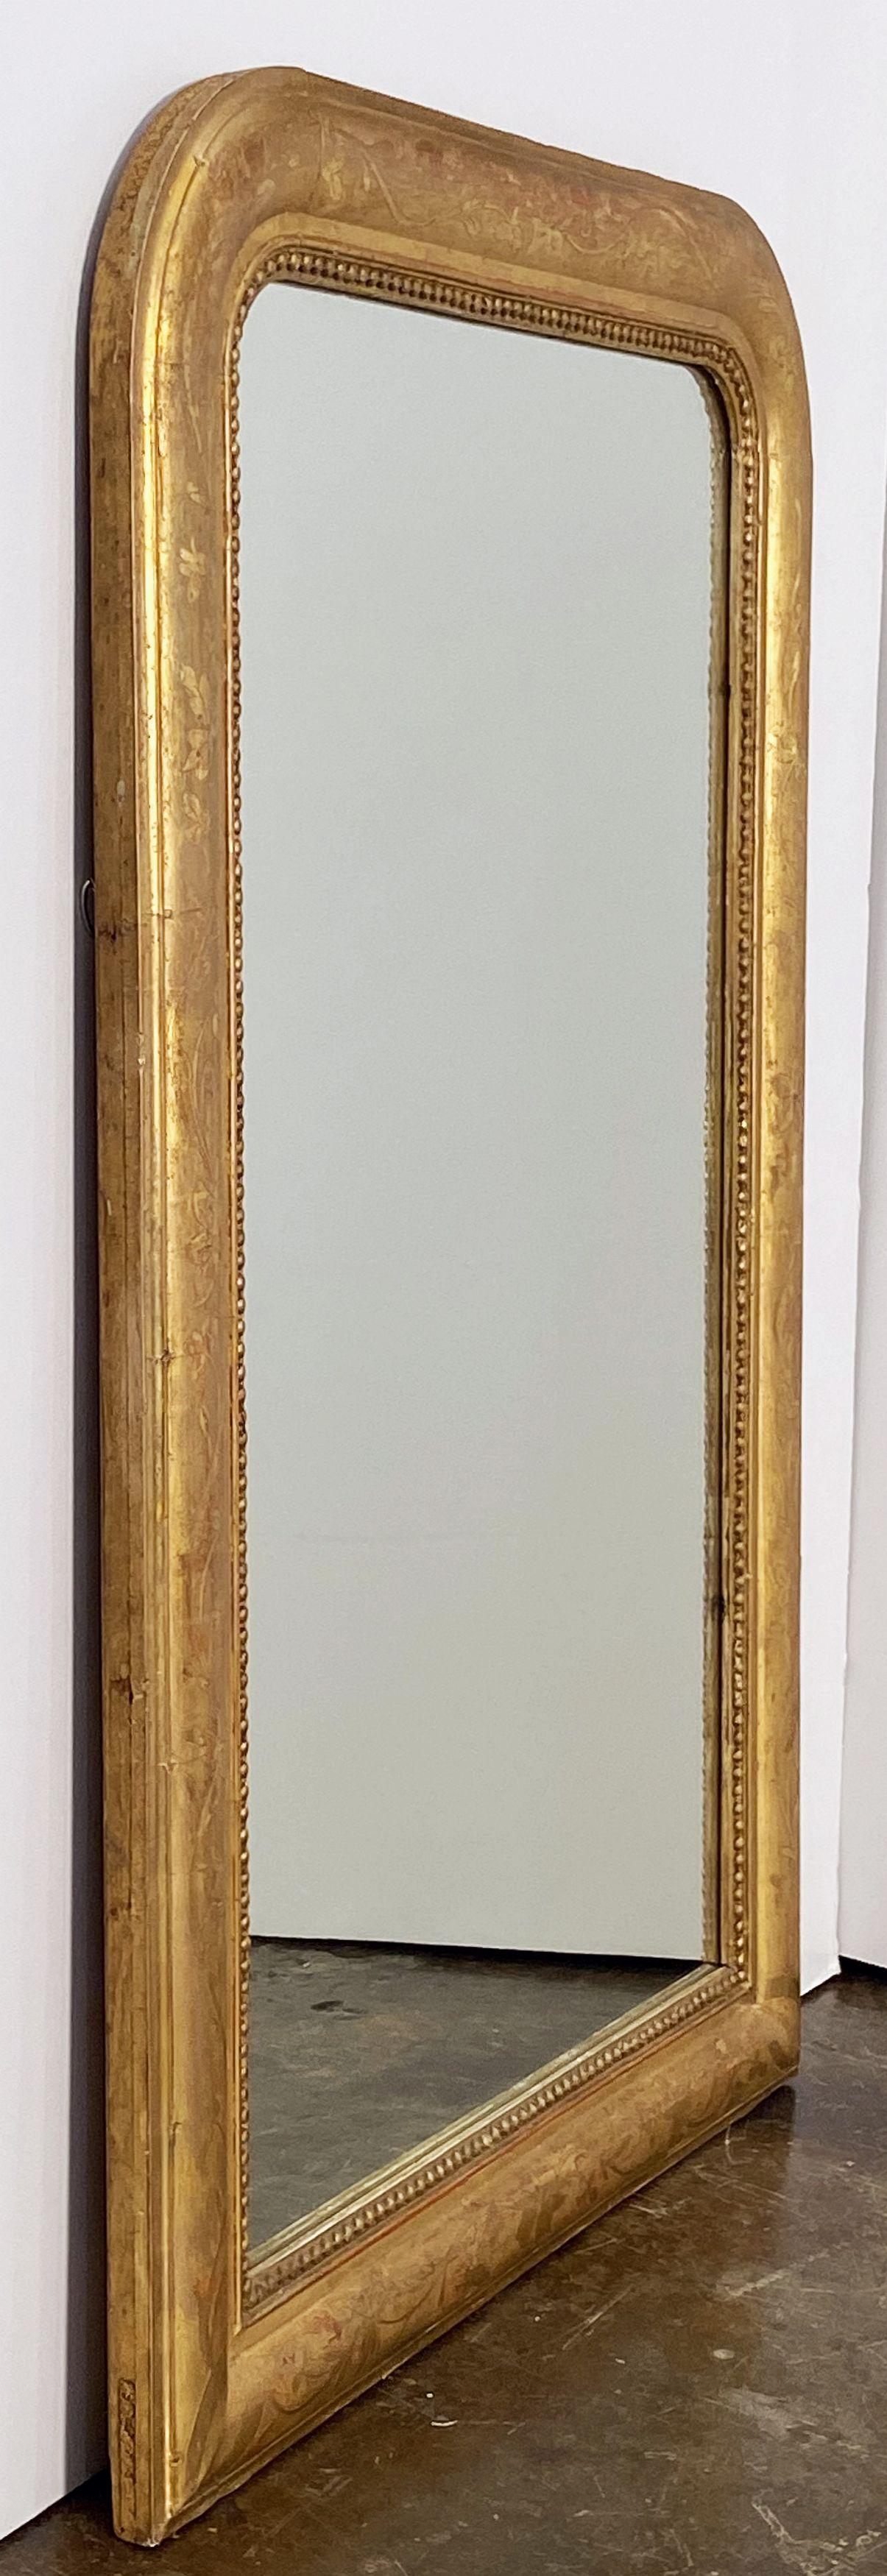 A handsome large Louis Philippe gilt wall mirror featuring a lovely moulded surround and an etched foliate design showing through gold-leaf.

Dimensions: H 38 1/2 inches x W 25 1/8 inches

Other sizes available in this style.